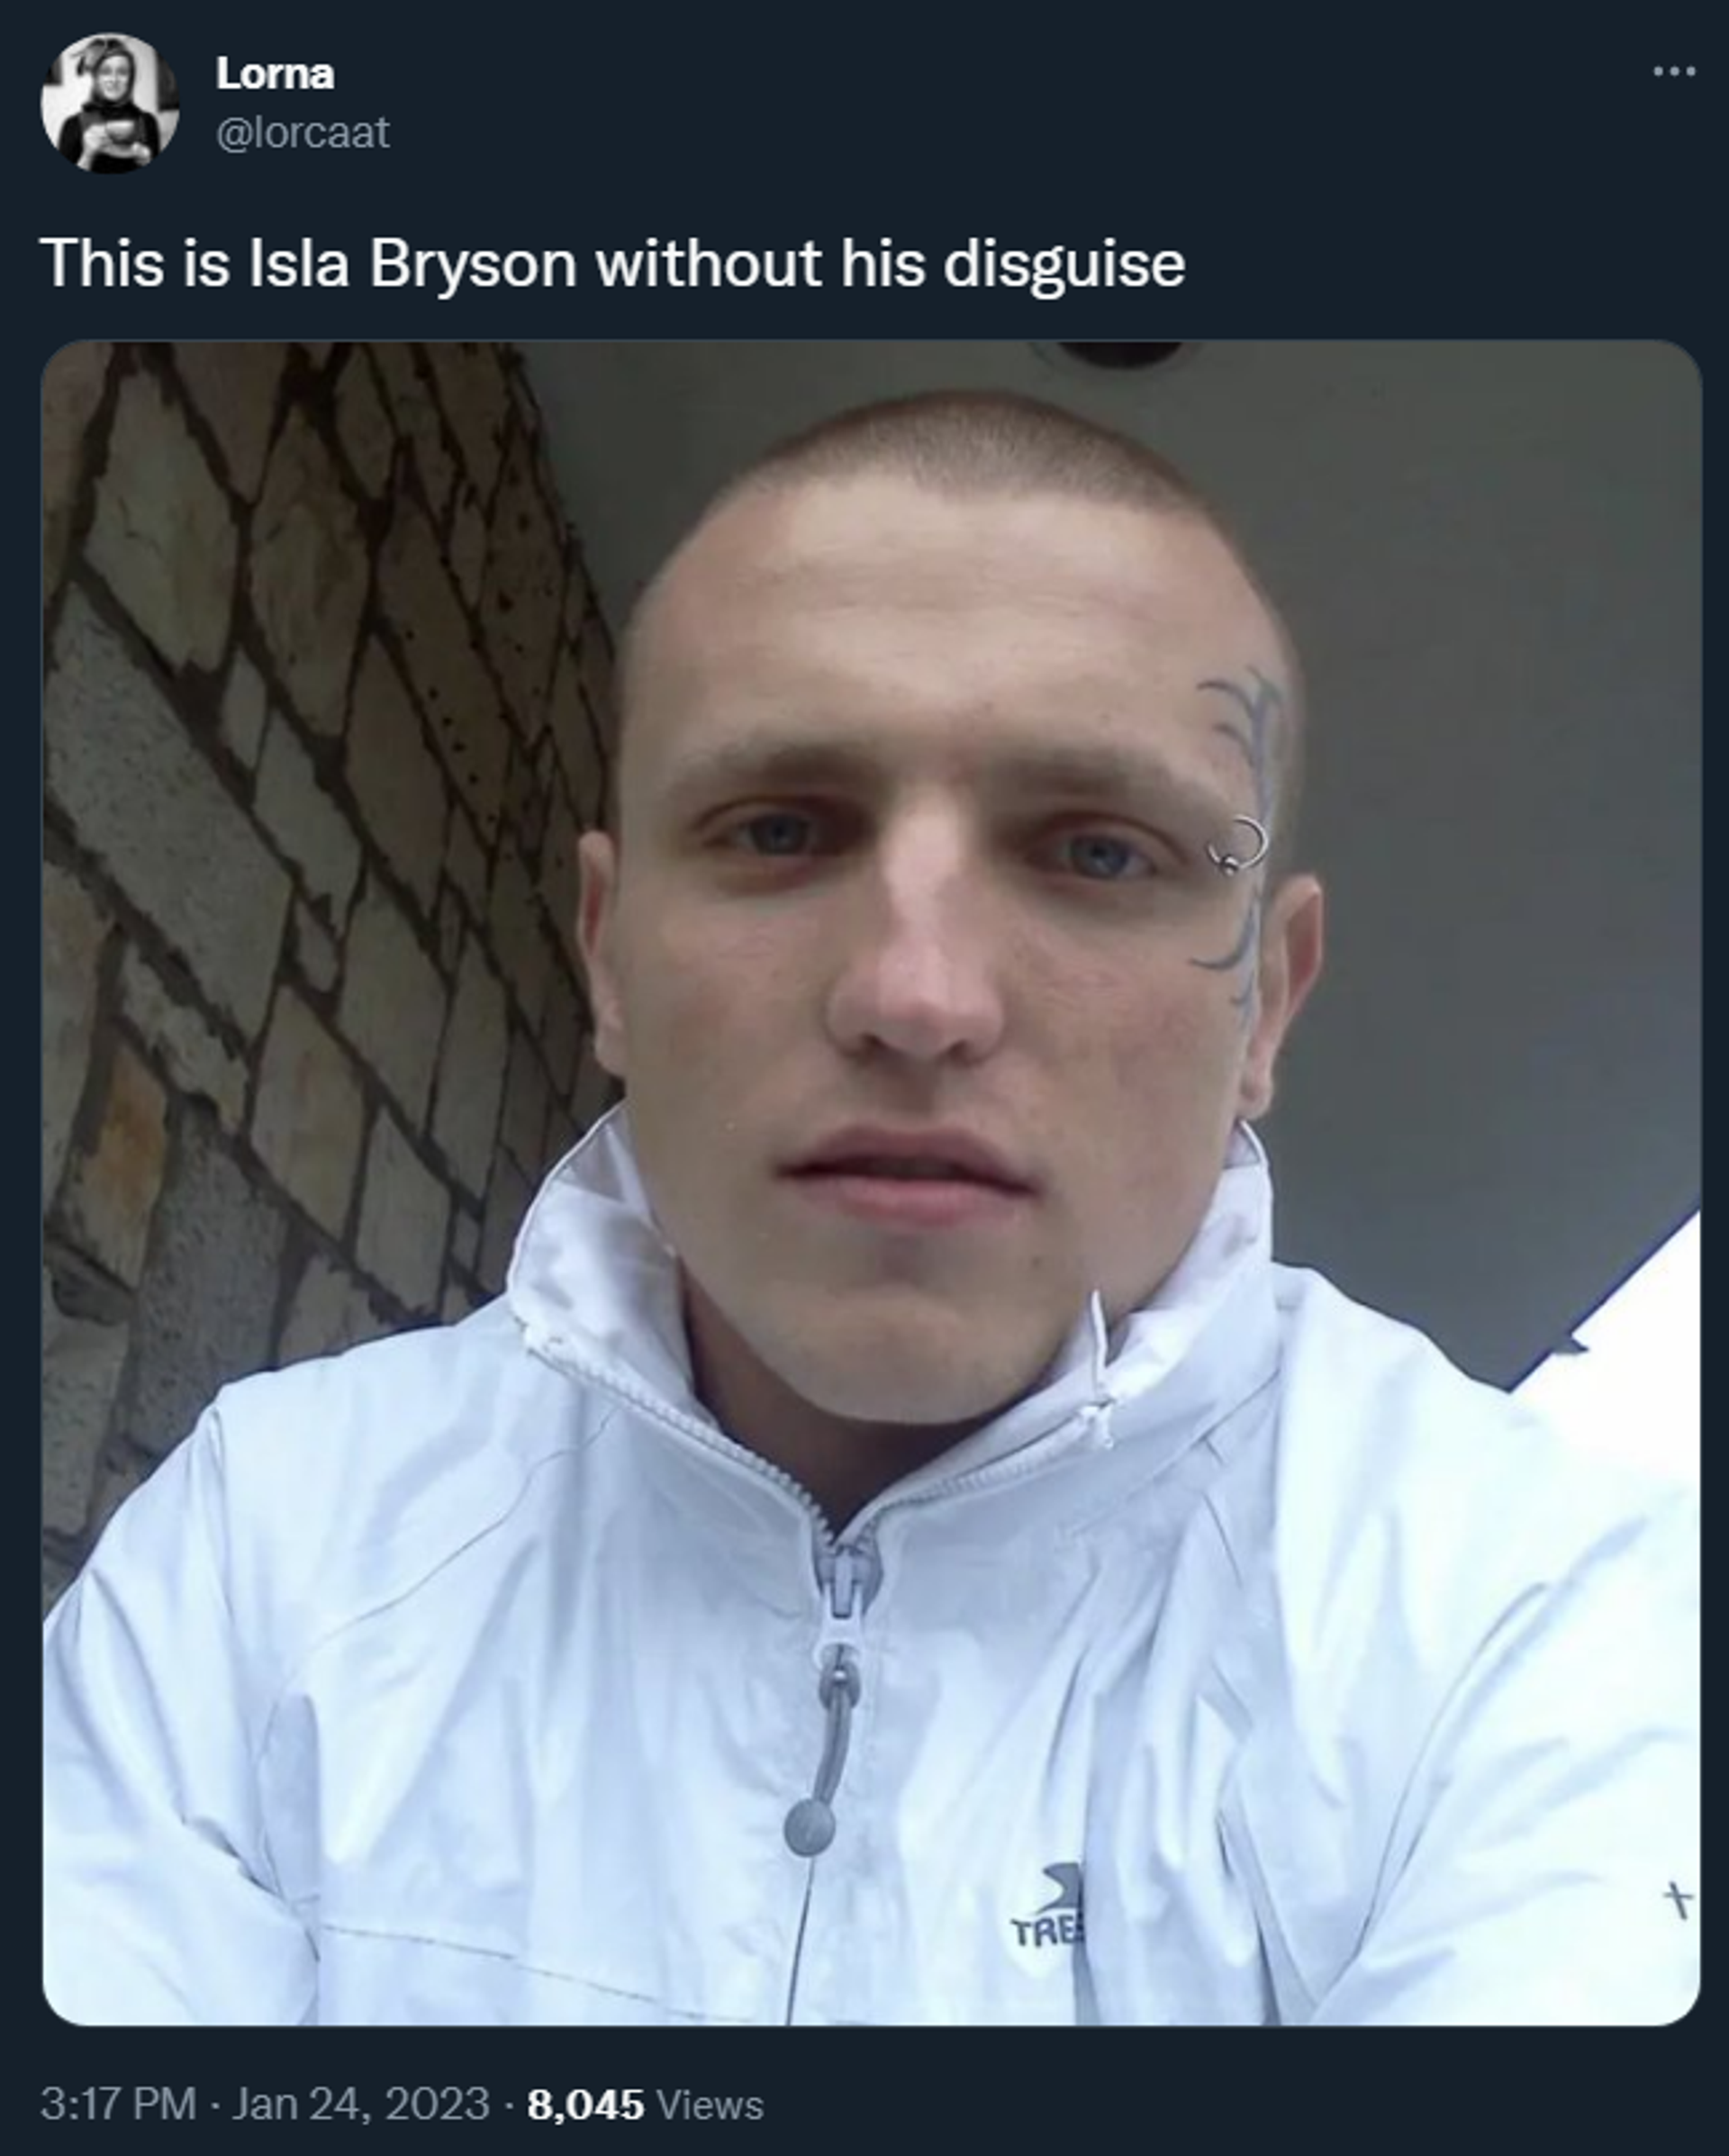 A tweeted photo of Scotsman Adam Graham, now known as trans woman Isla Bryson, who was convicted of two rapes on January 24 2023 - Sputnik International, 1920, 24.01.2023